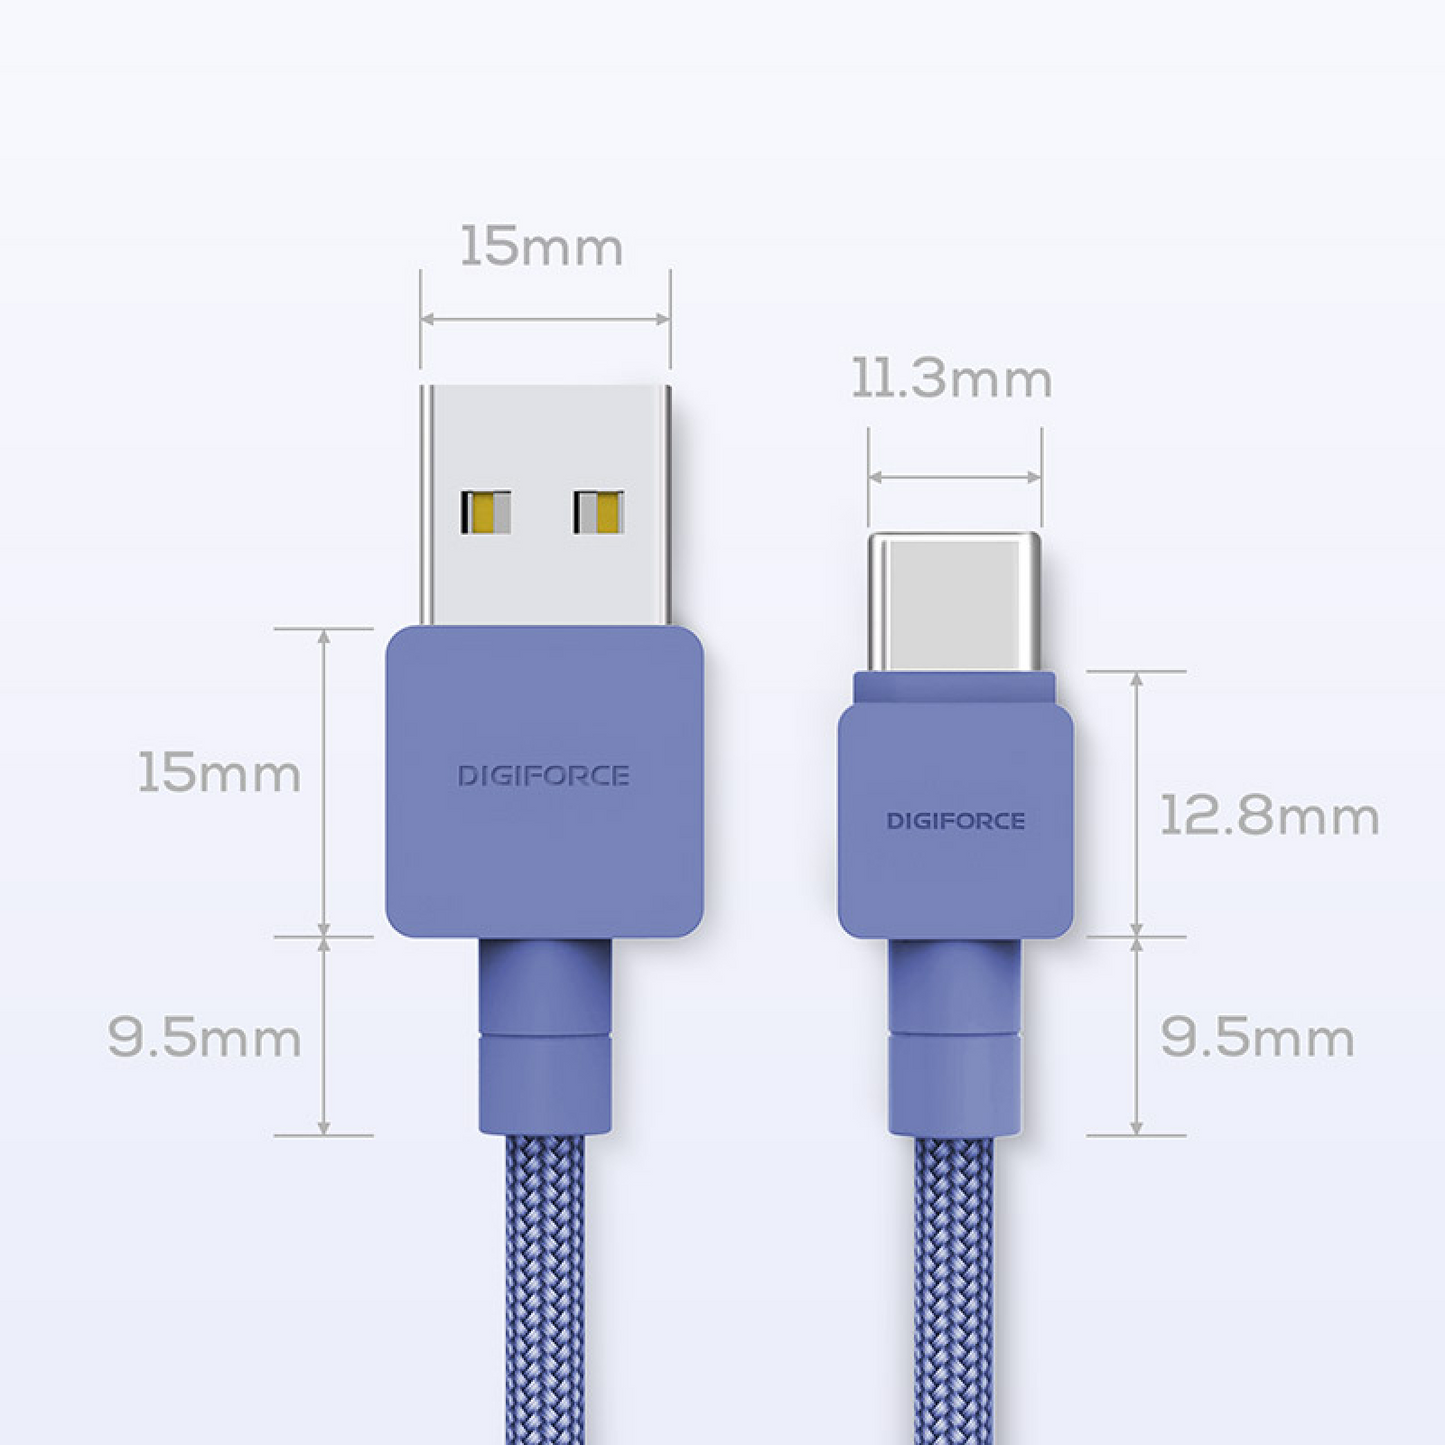 【Type-A to C Cable 1m】USB-A スマートフォン タブレット端末 ゲームコントローラー D0083